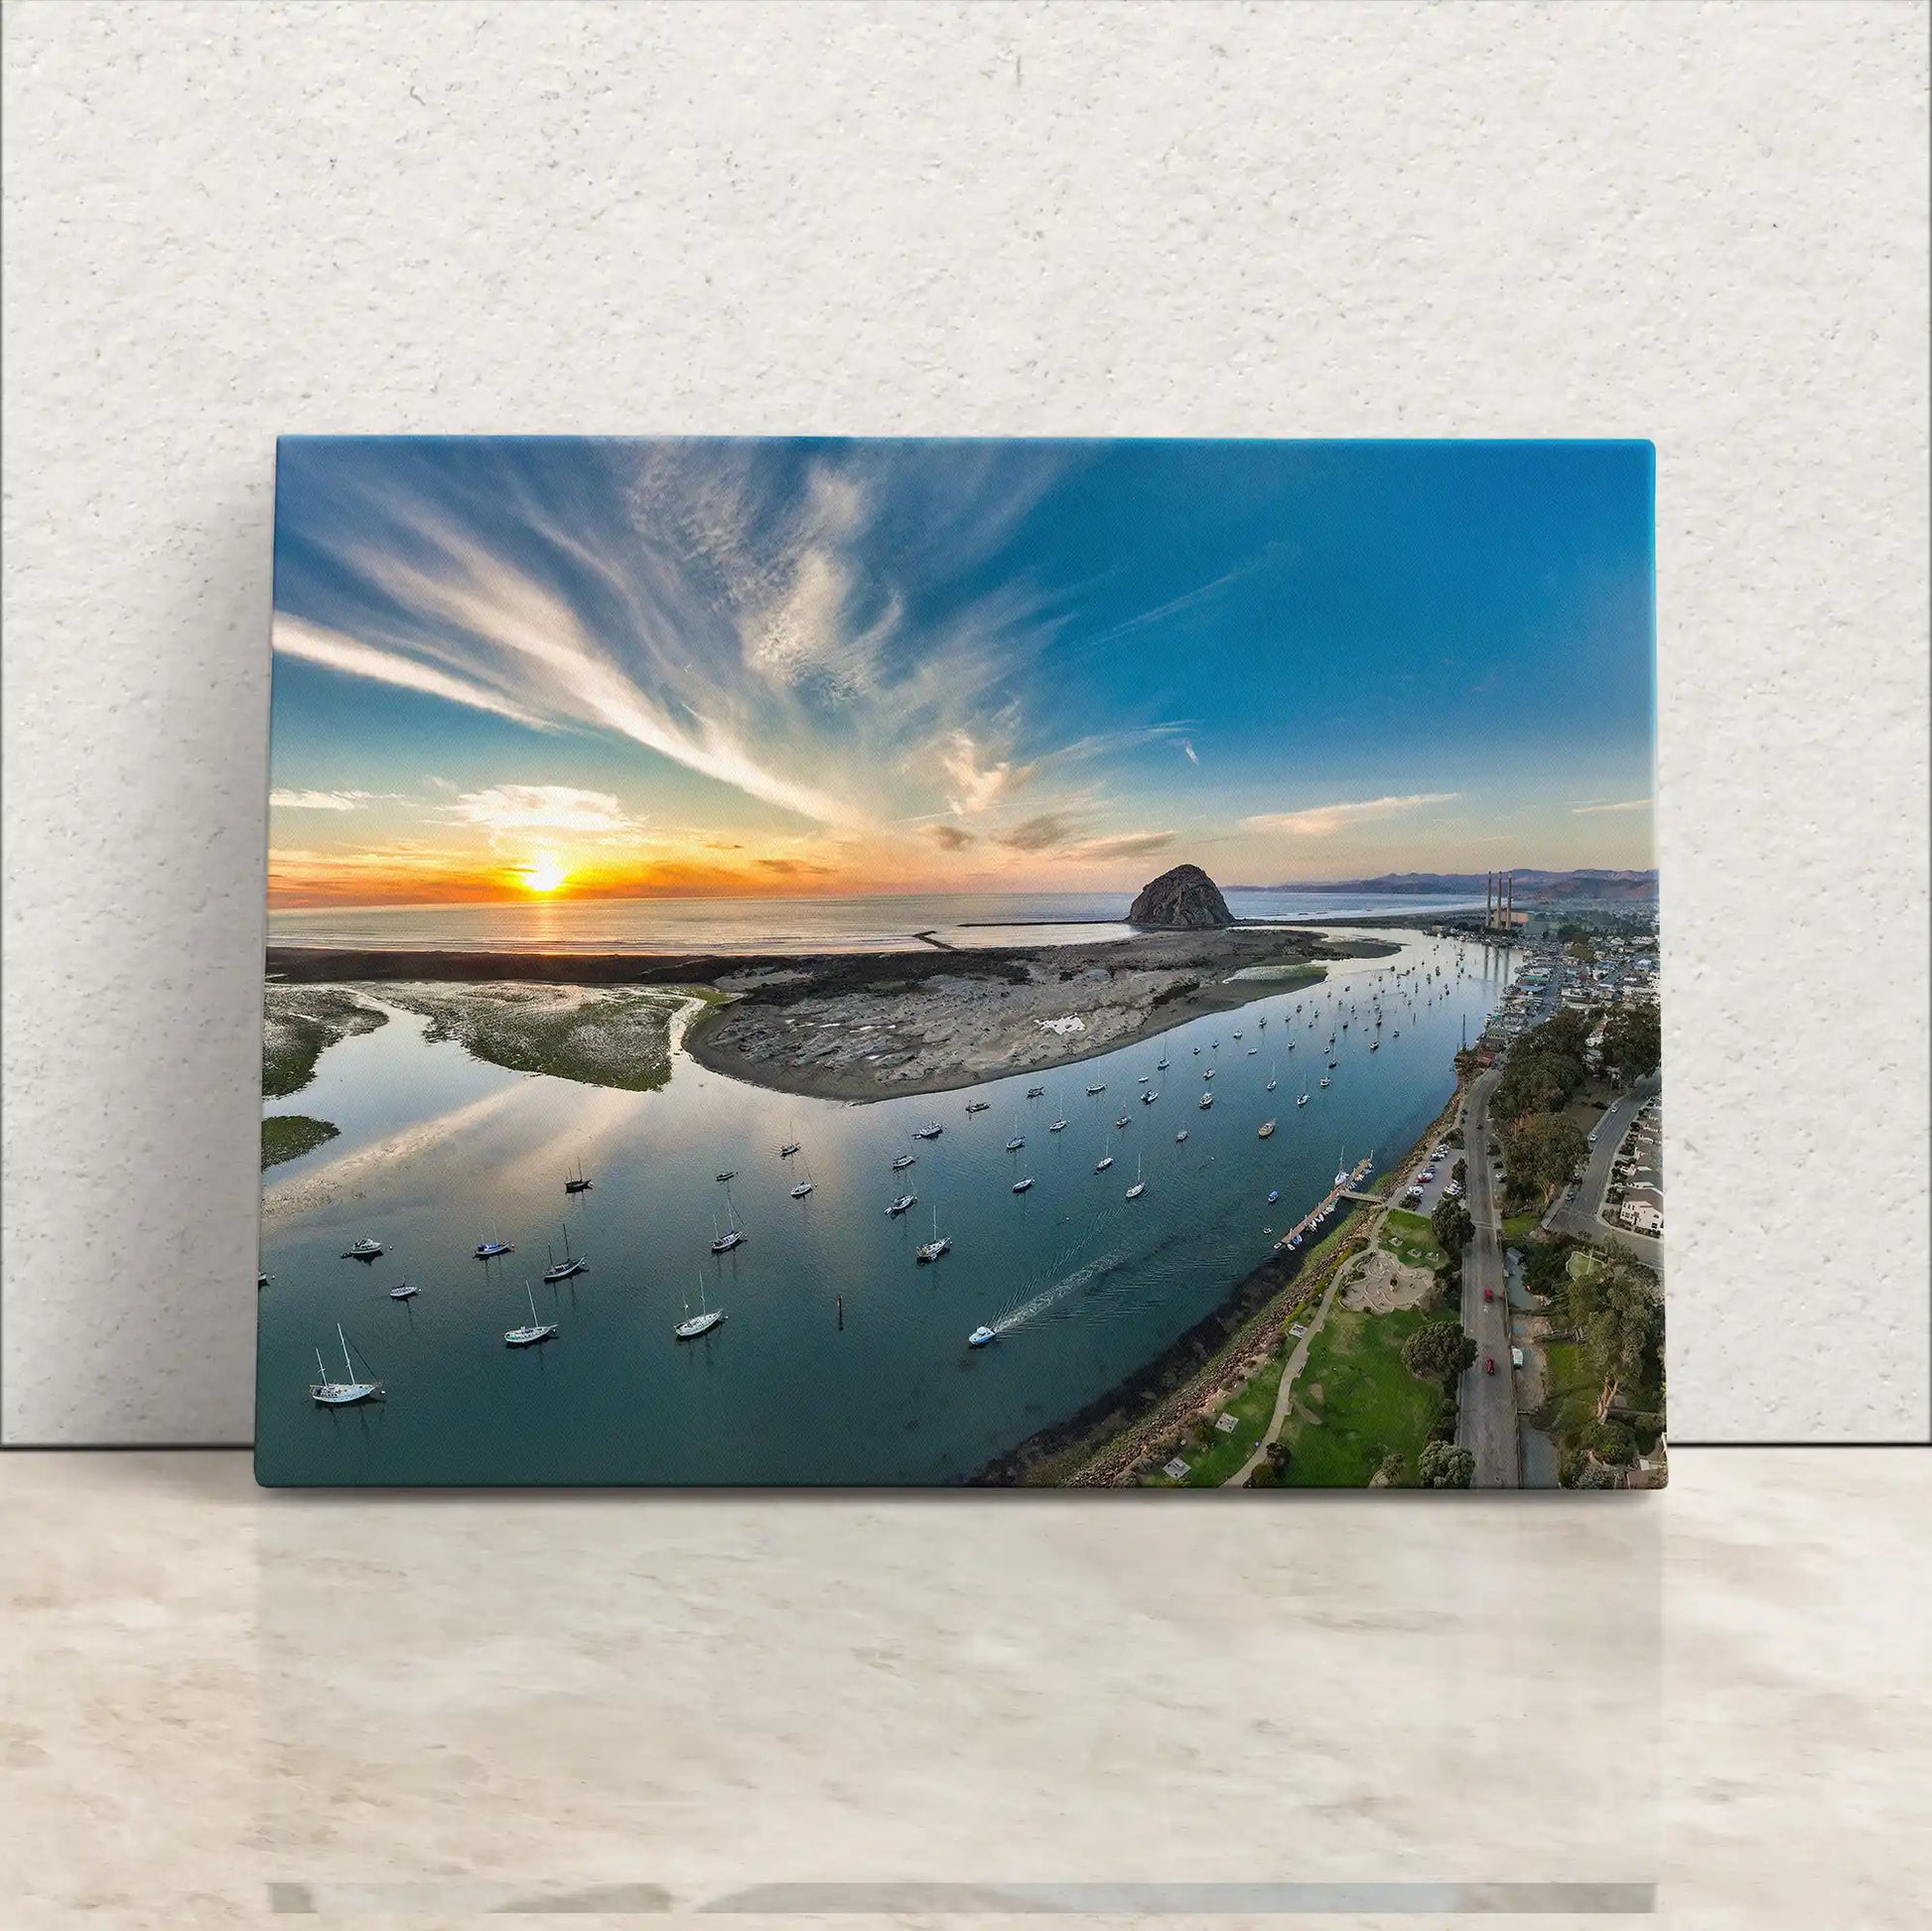 Canvas art capturing the sunset over Morro Bay, with Morro Rock and anchored boats reflecting the serene California coastal vibe.